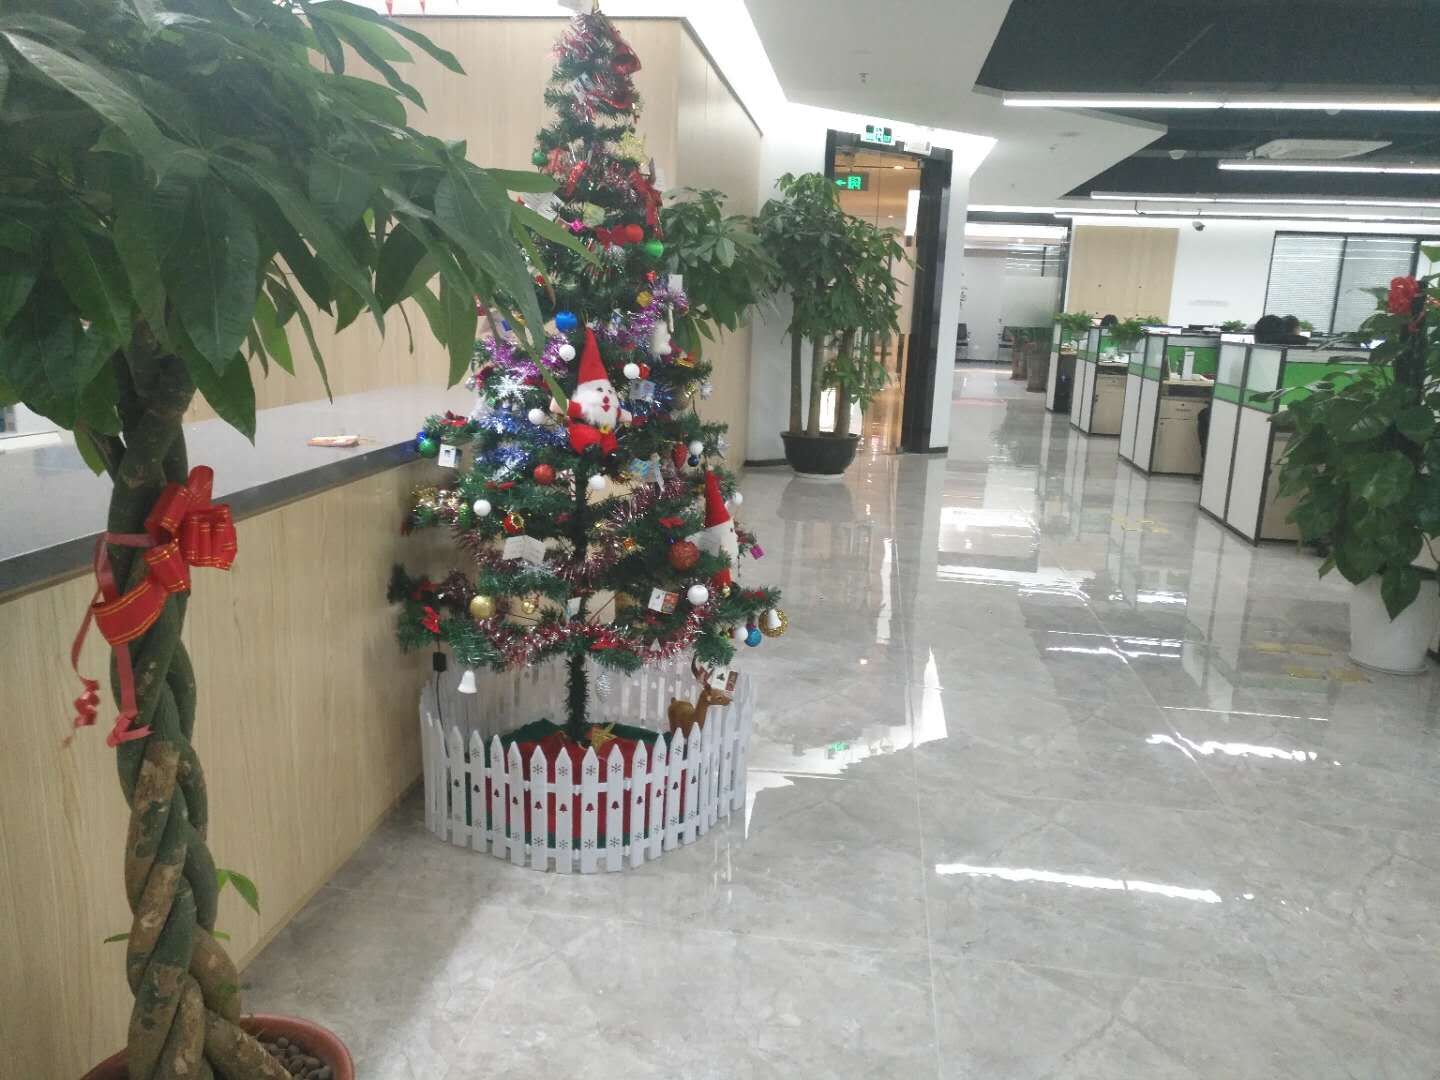 Sunny Group office with Christmas decoration